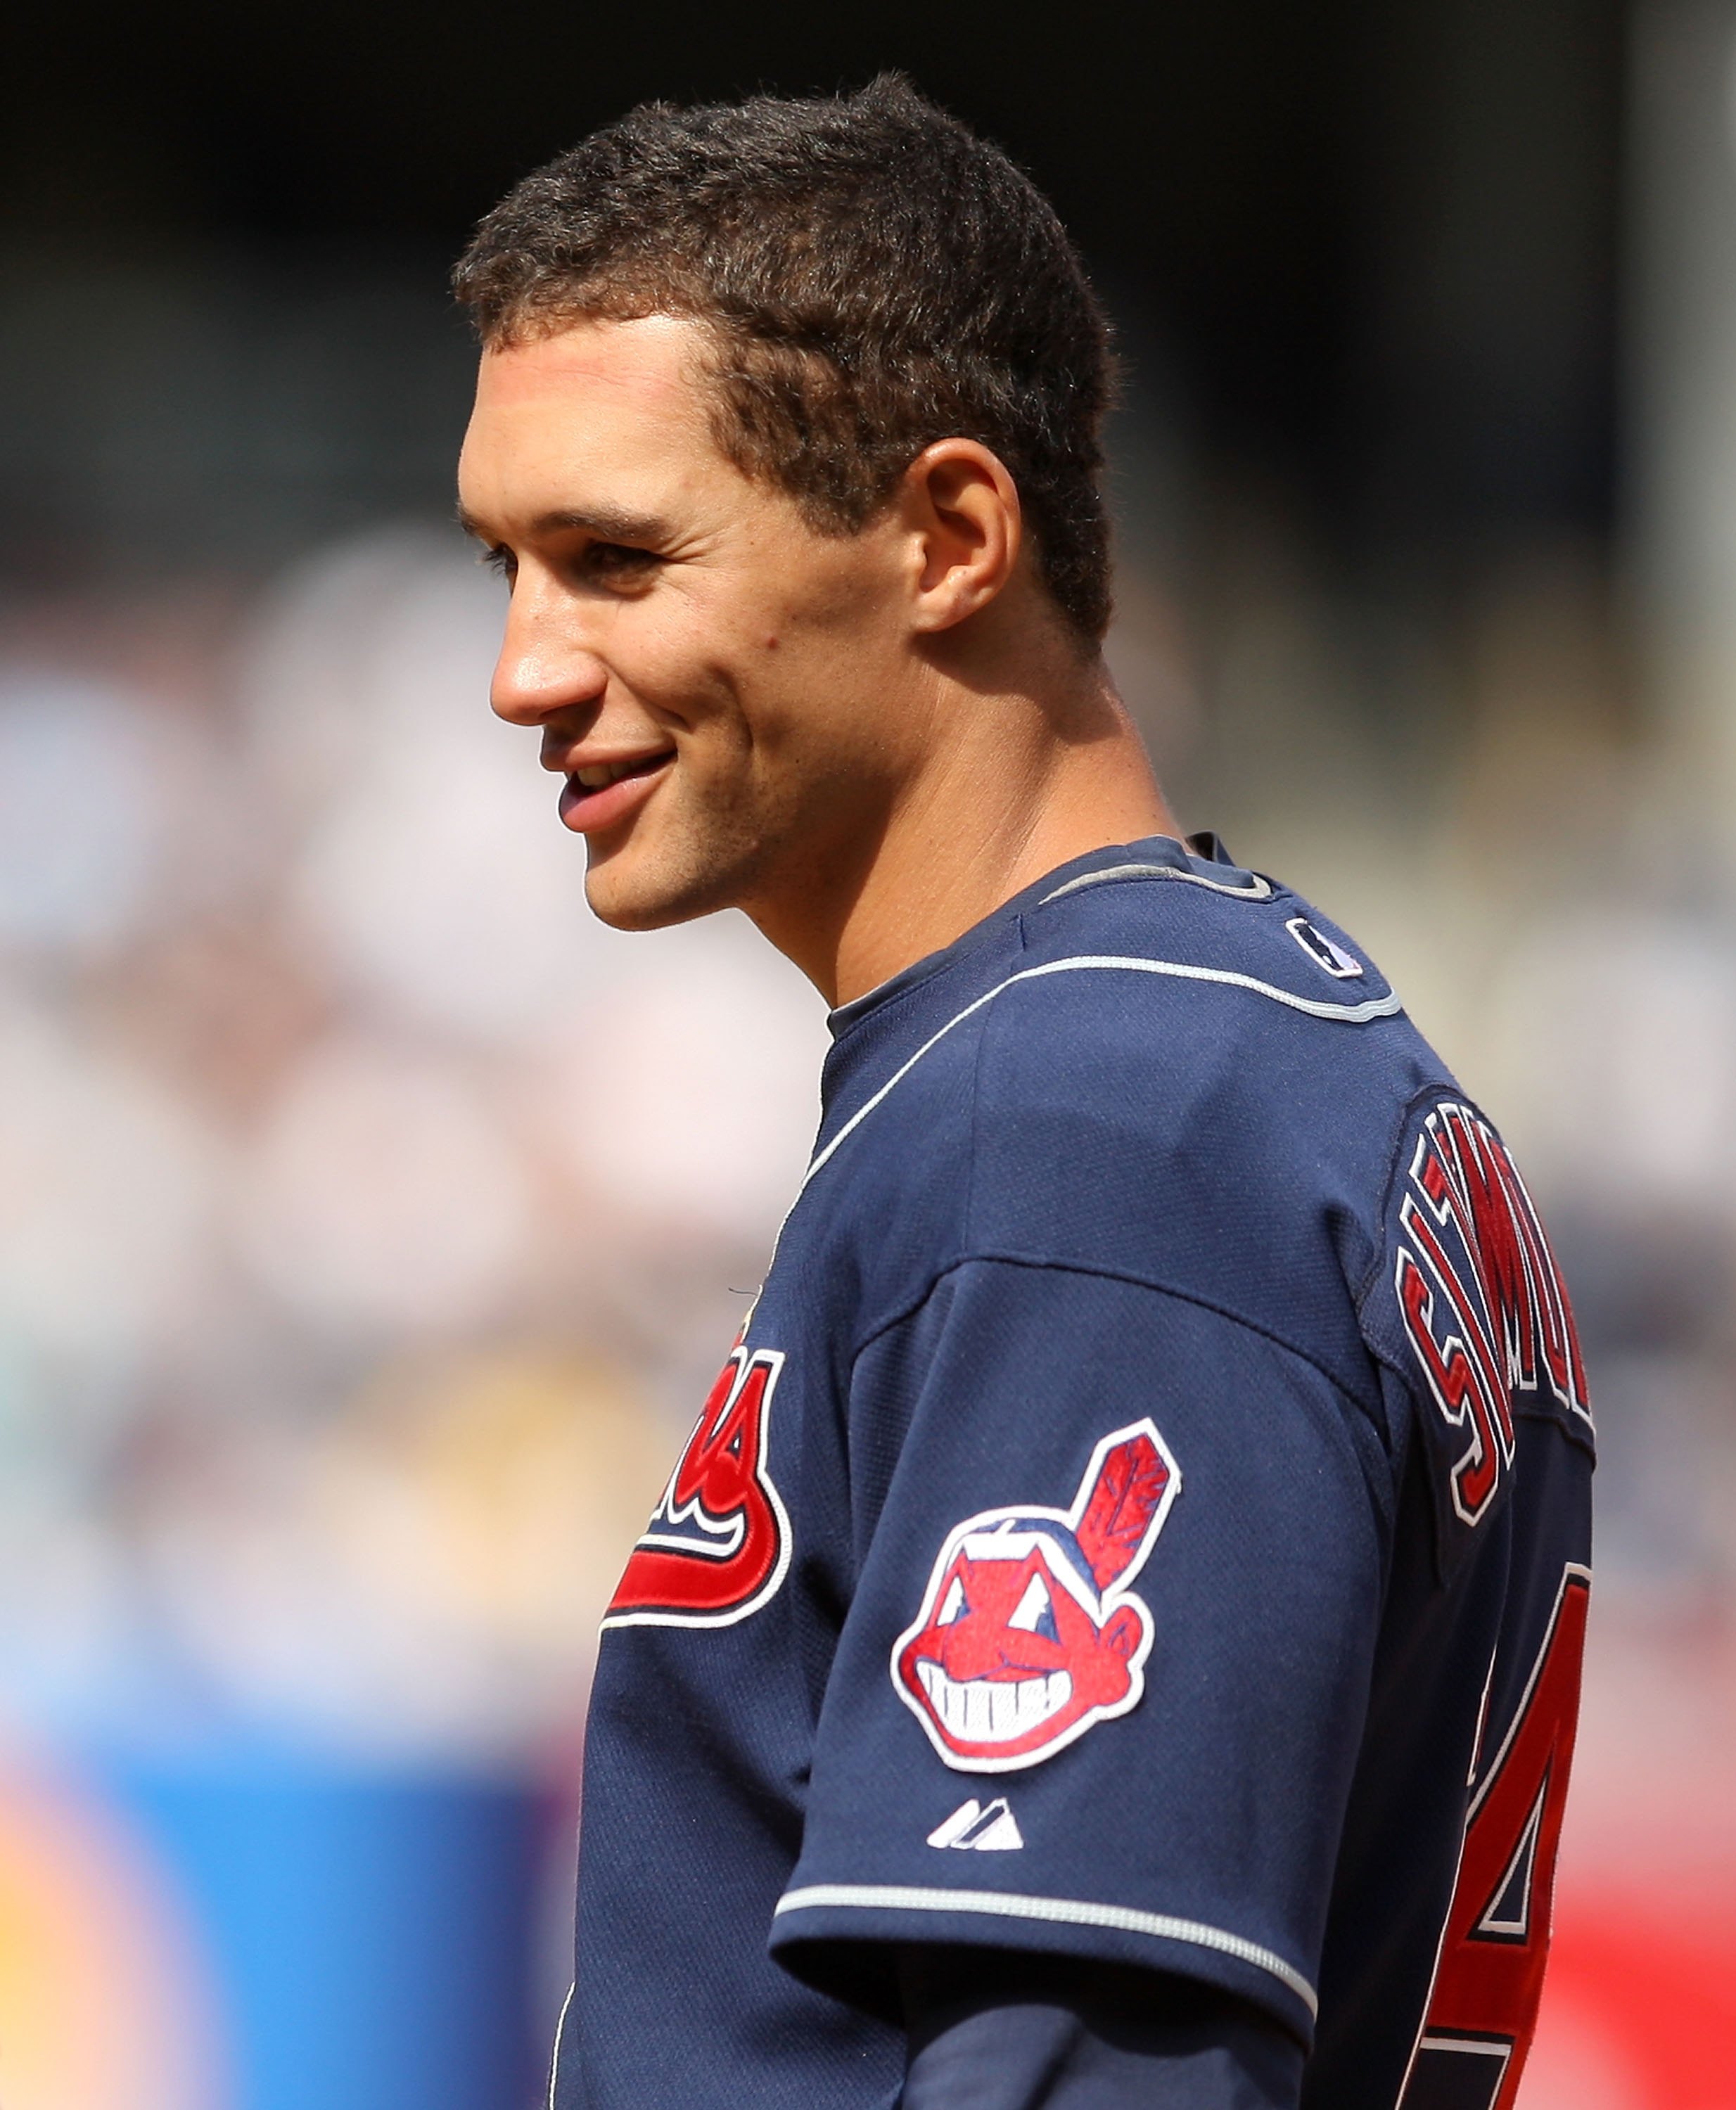 Also an option for Phillies: Grady Sizemore